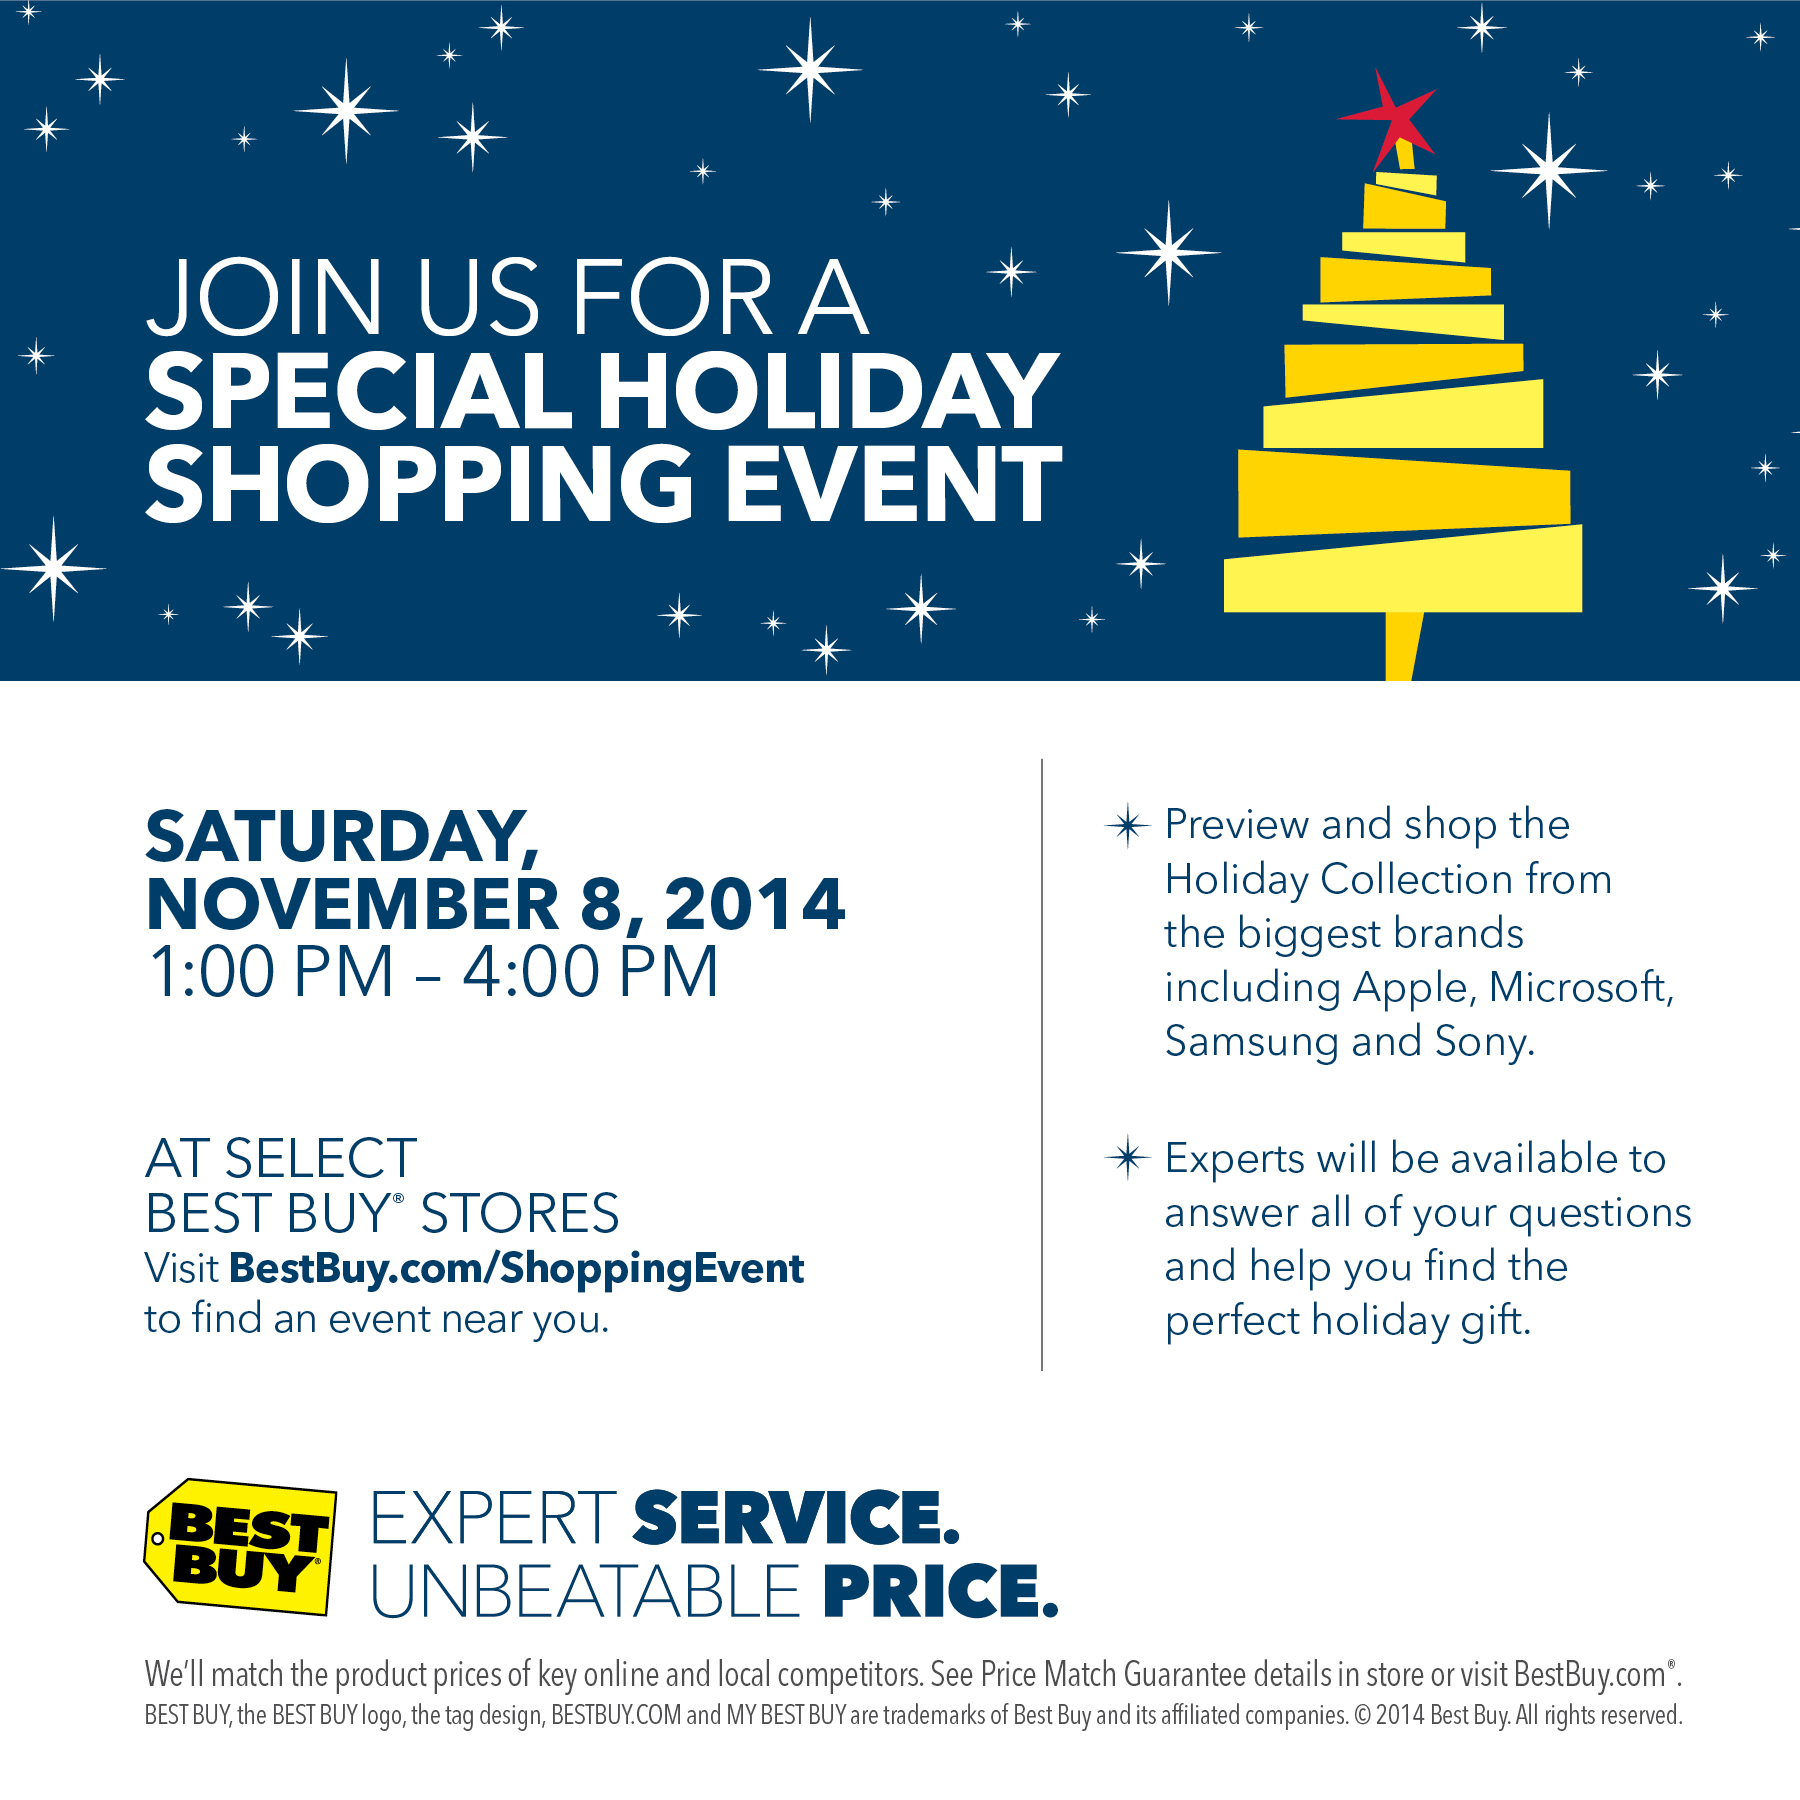 Grab One Day Only Deals at the Best Buy Holiday Shopping Event November